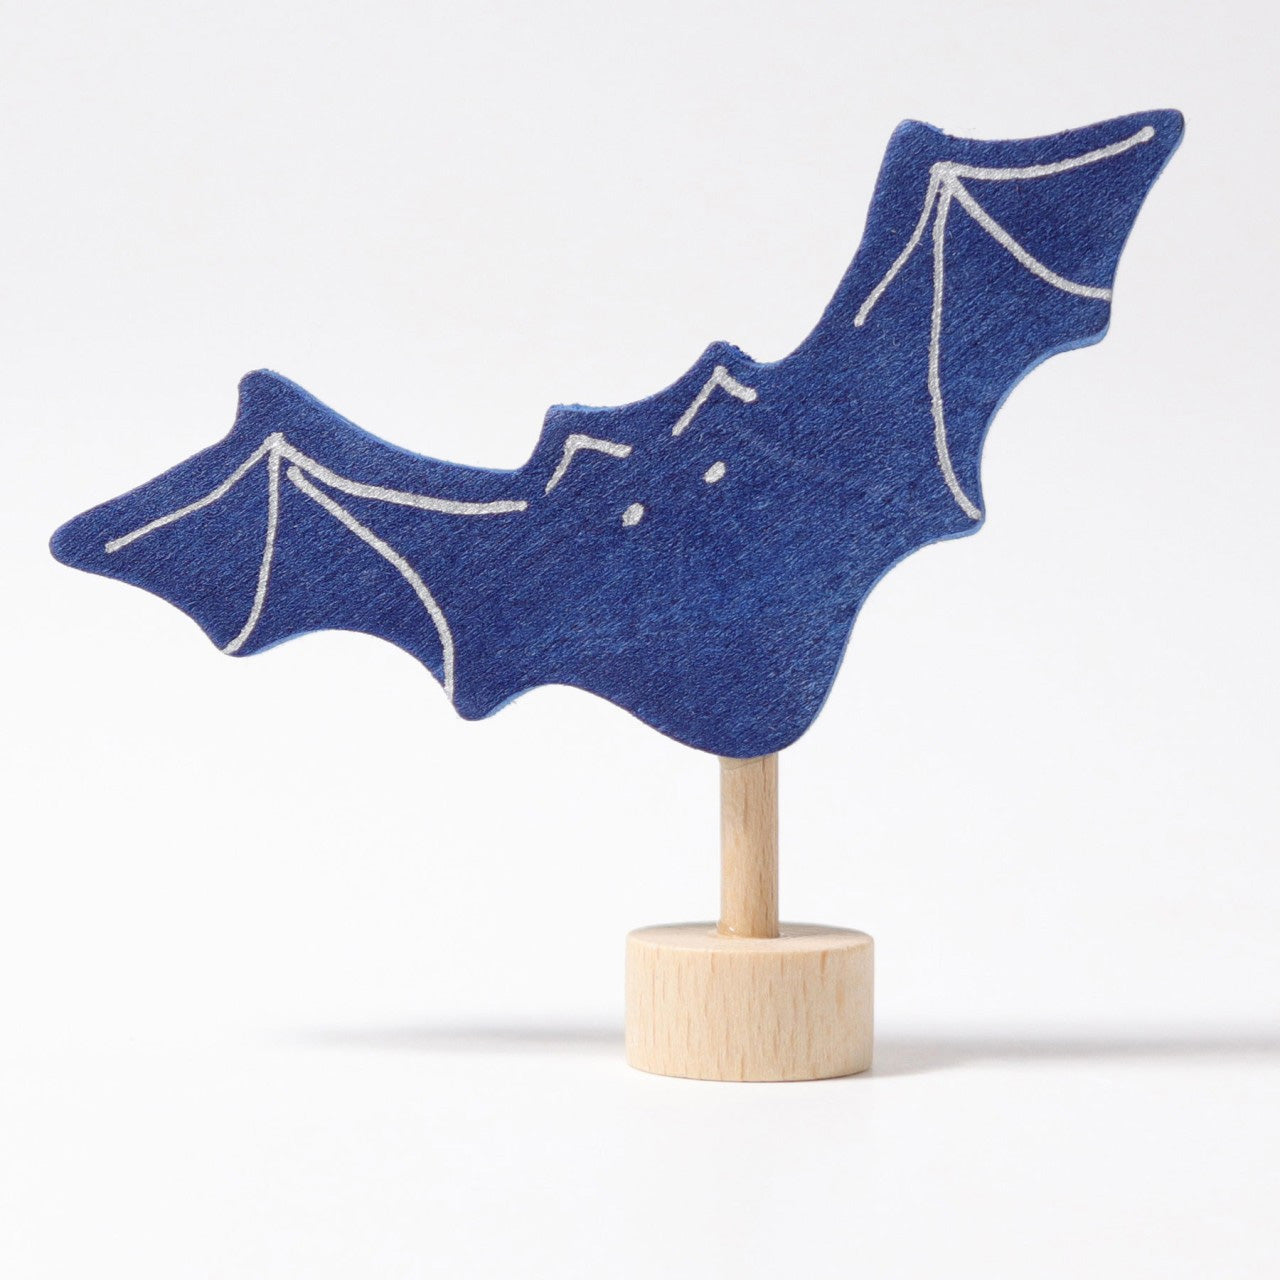 Blue bat ornament made of wood for celebration rings